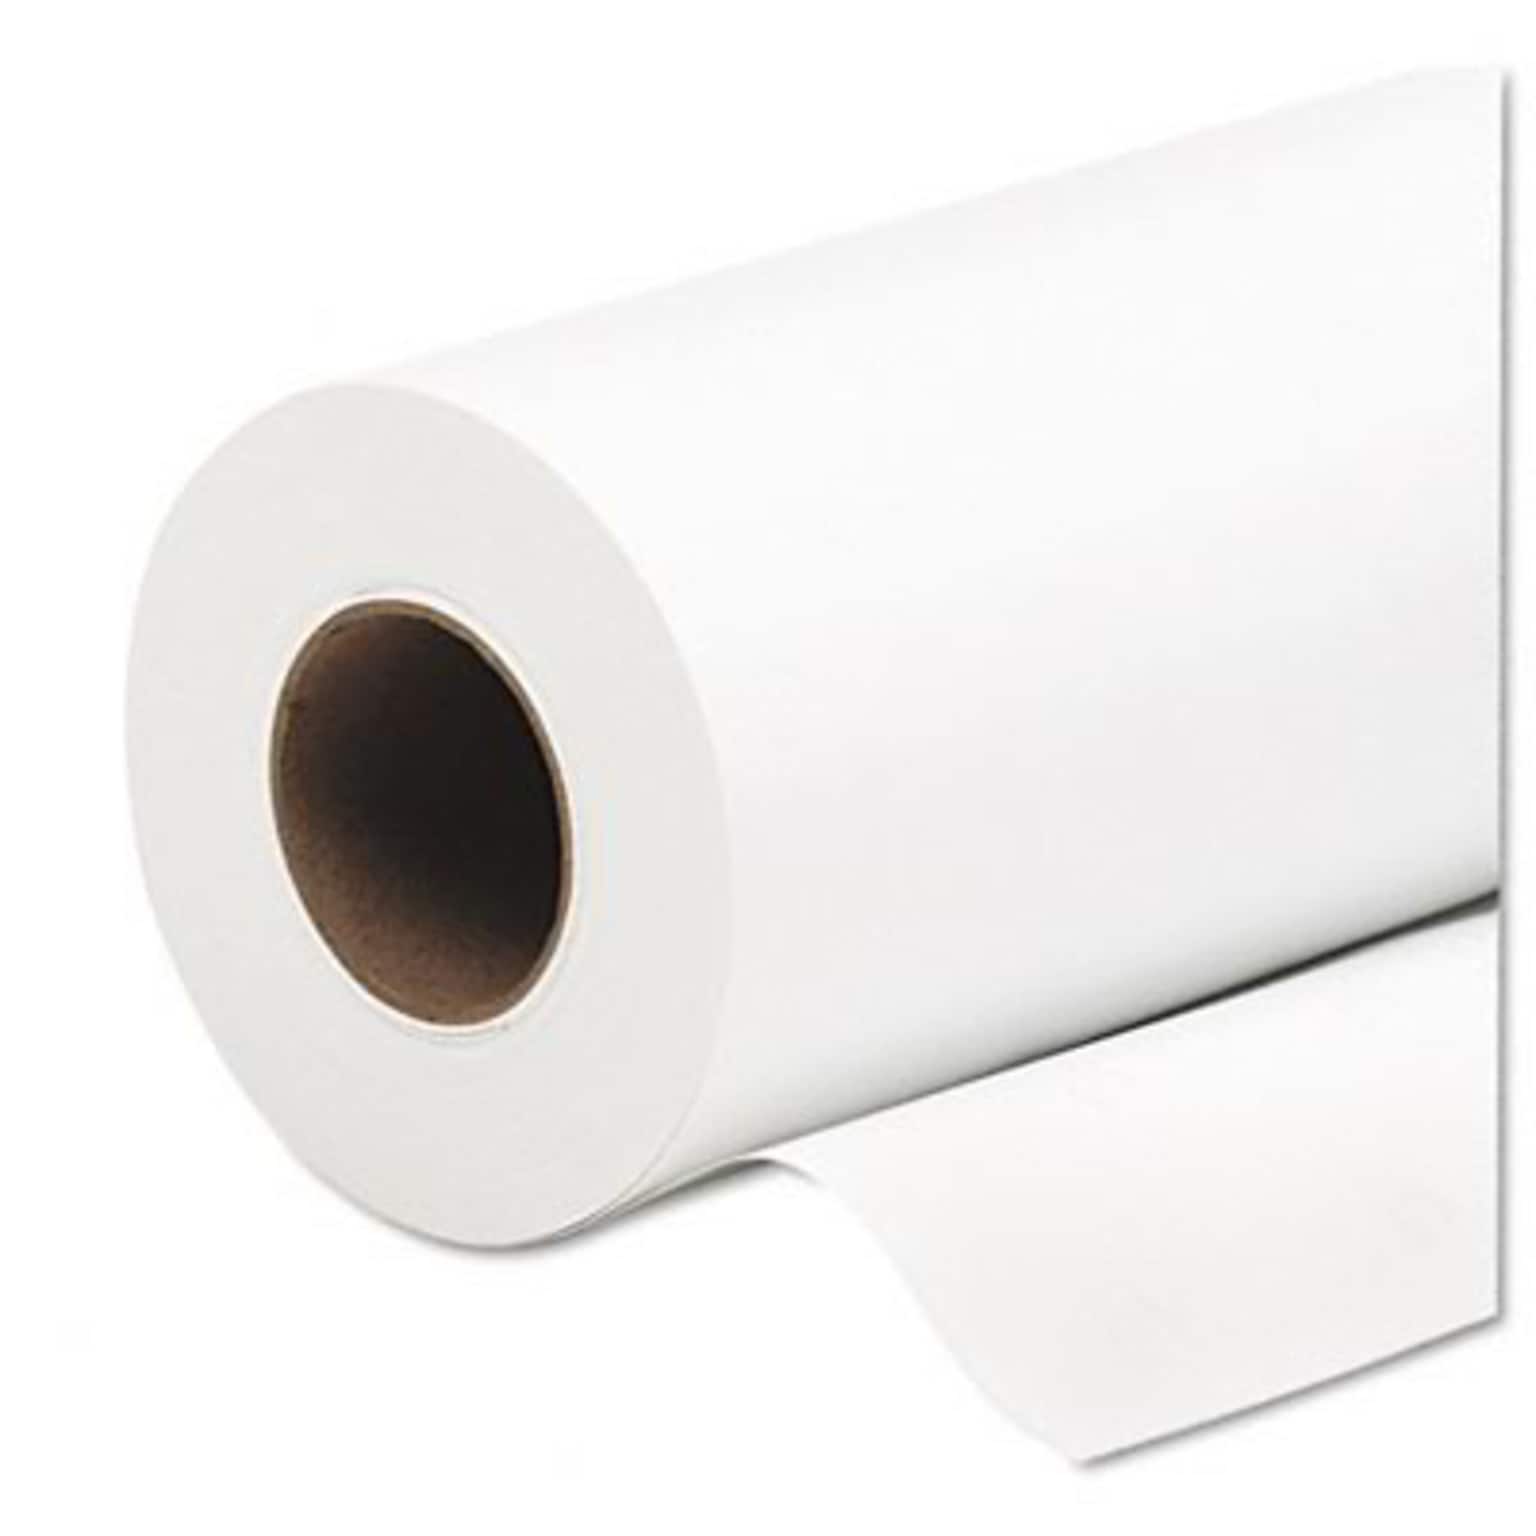 HP Everyday Pigment Ink Photo Paper Roll, 9.1 mil, 24 x 100 ft, Satin White, 1/Roll (HEWQ8920A)